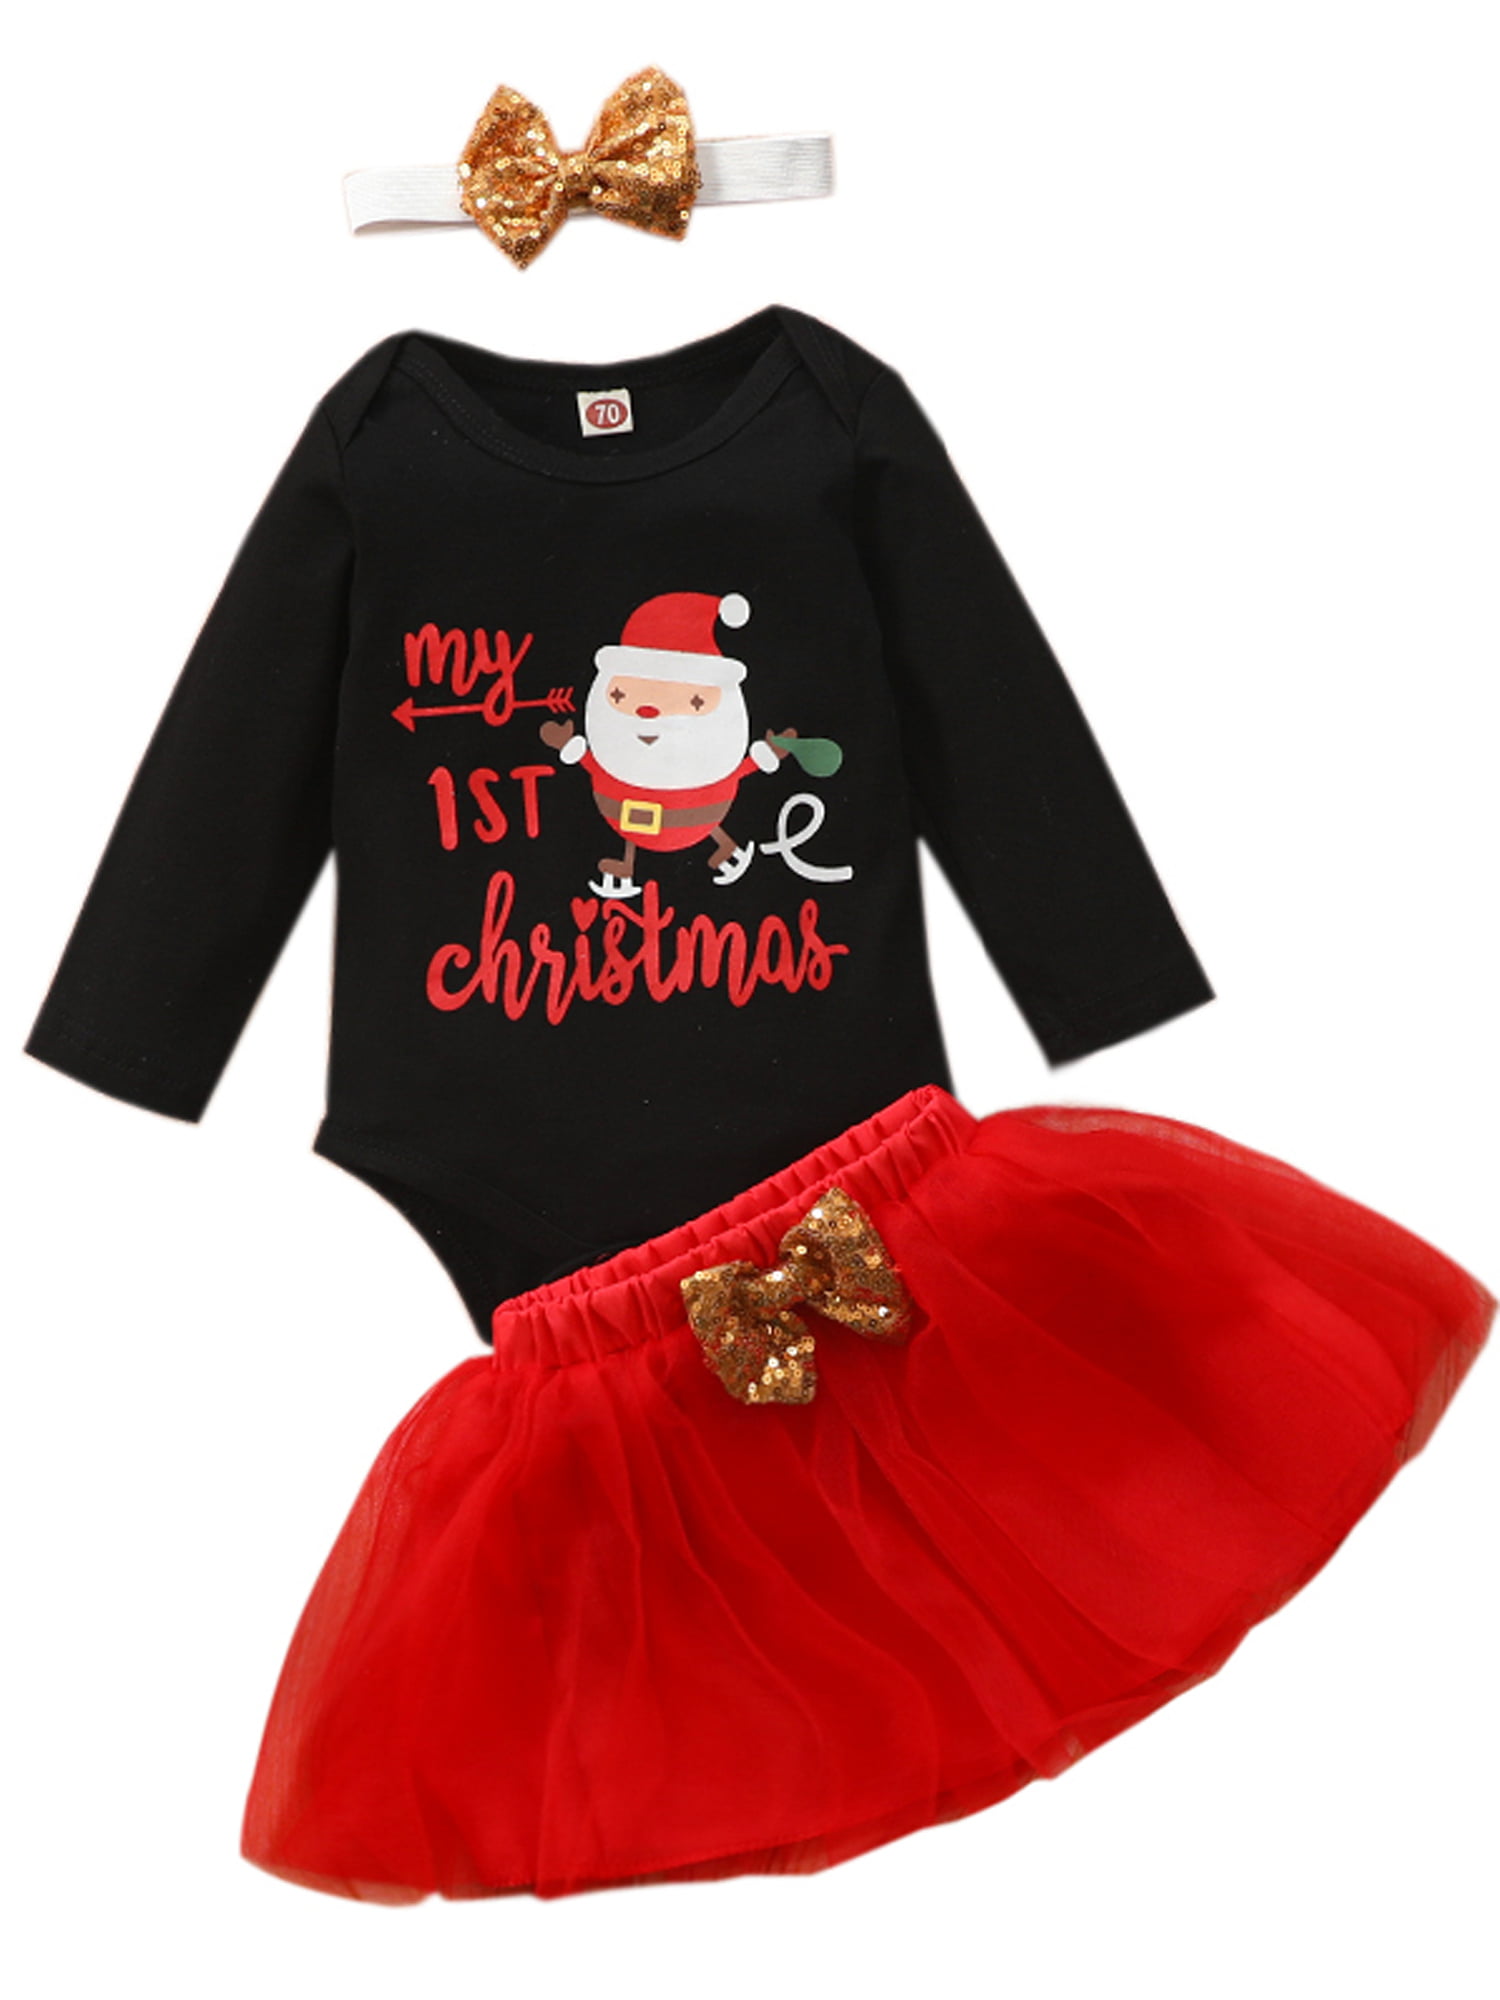 Christmas Newborn Clothes Infant Baby Girls My 1st Christmas Romper Dot Tutu Skirt Bow Sequins 3Pcs Outfits Set